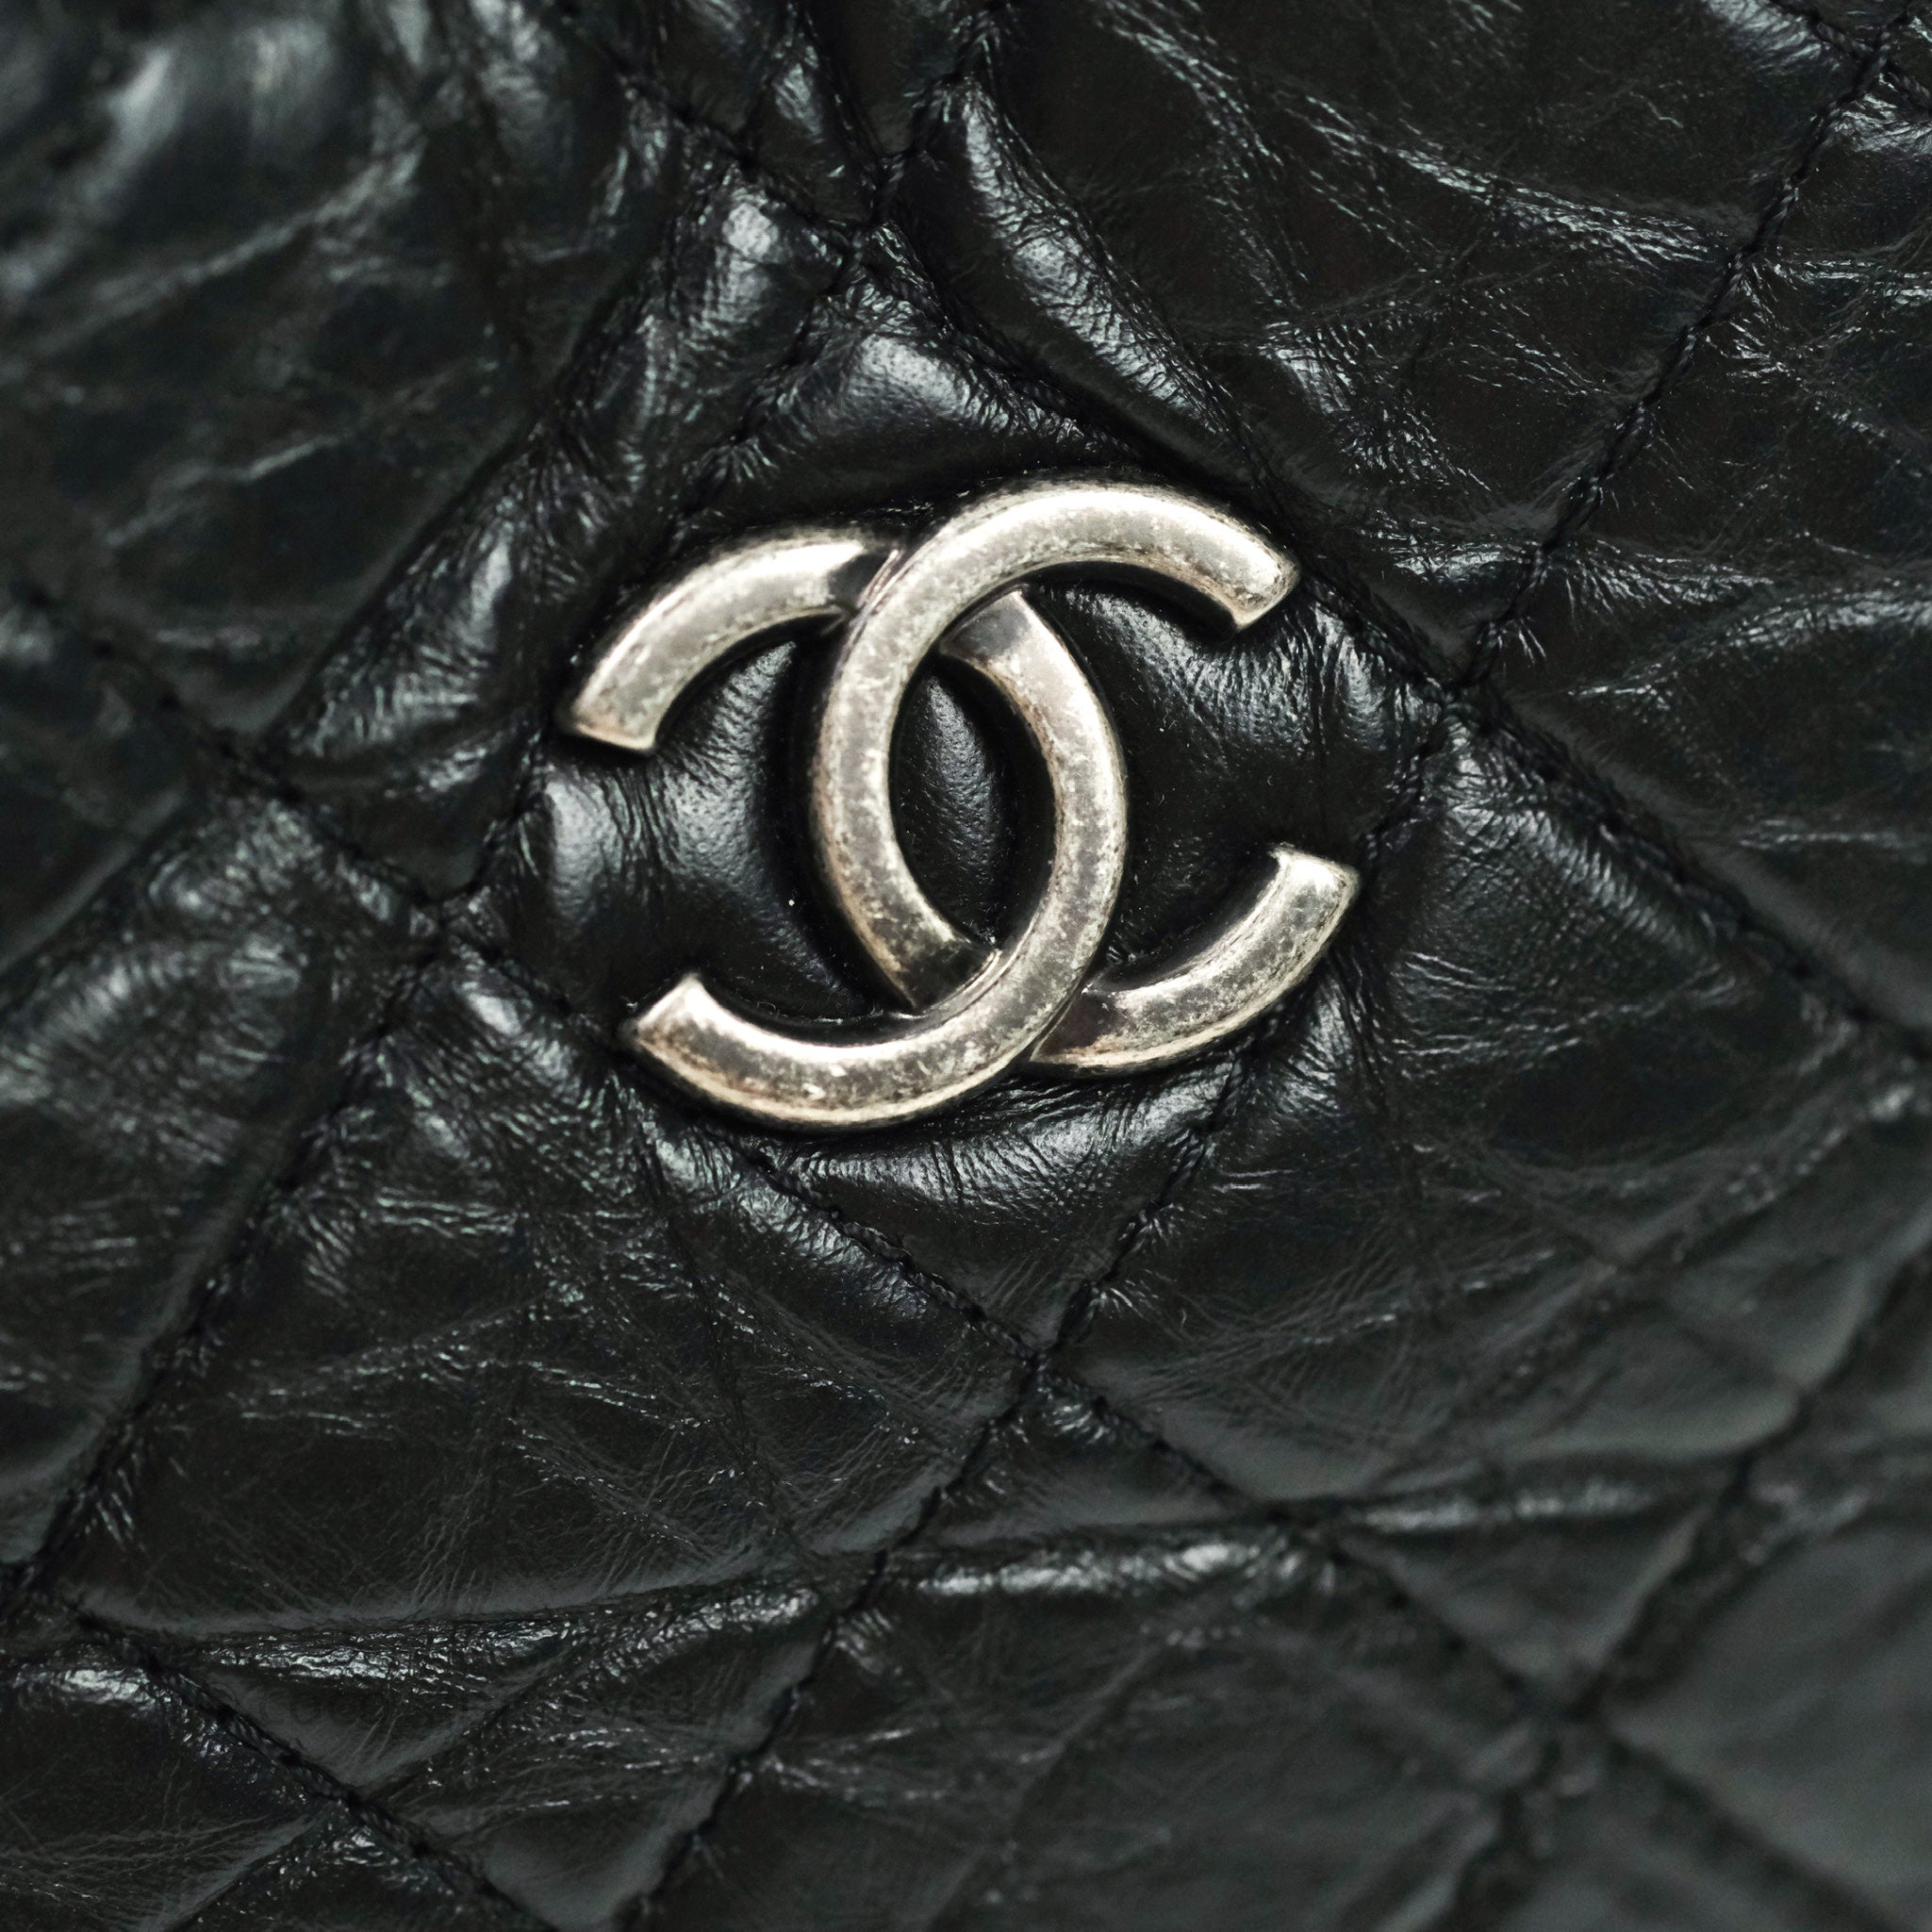 Chanel Chevron Small Gabrielle Backpack Black Aged Calfskin – Coco Approved  Studio